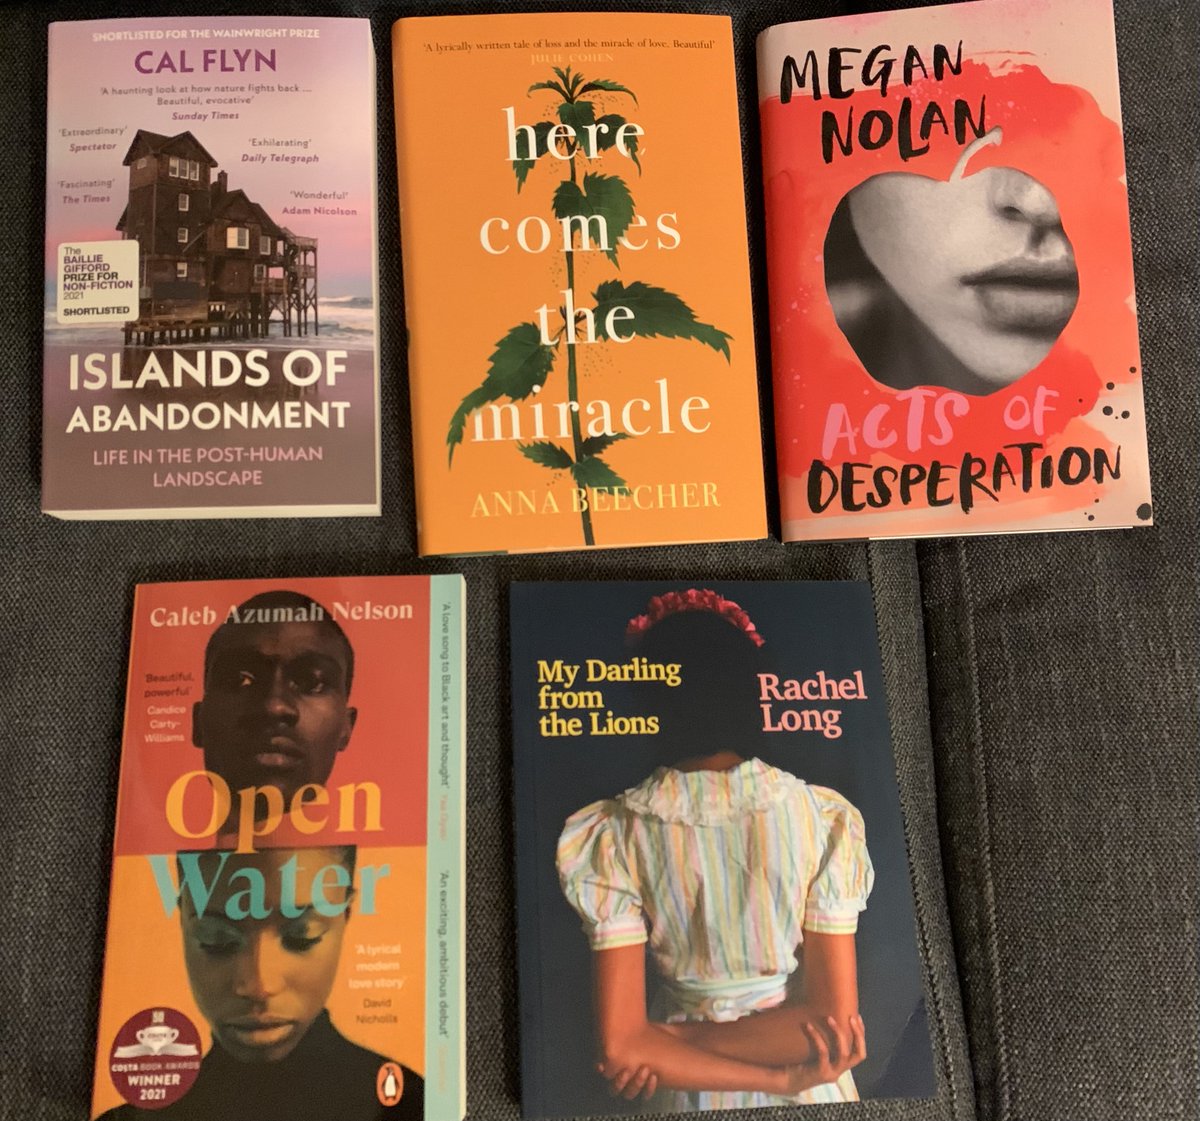 Thank you @zarakg for these gorgeous shortlisted books from #YoungWriterAward @YoungWriterYear. The winner will be announced on 24 February! See youngwriteraward.com for more! #BookPost